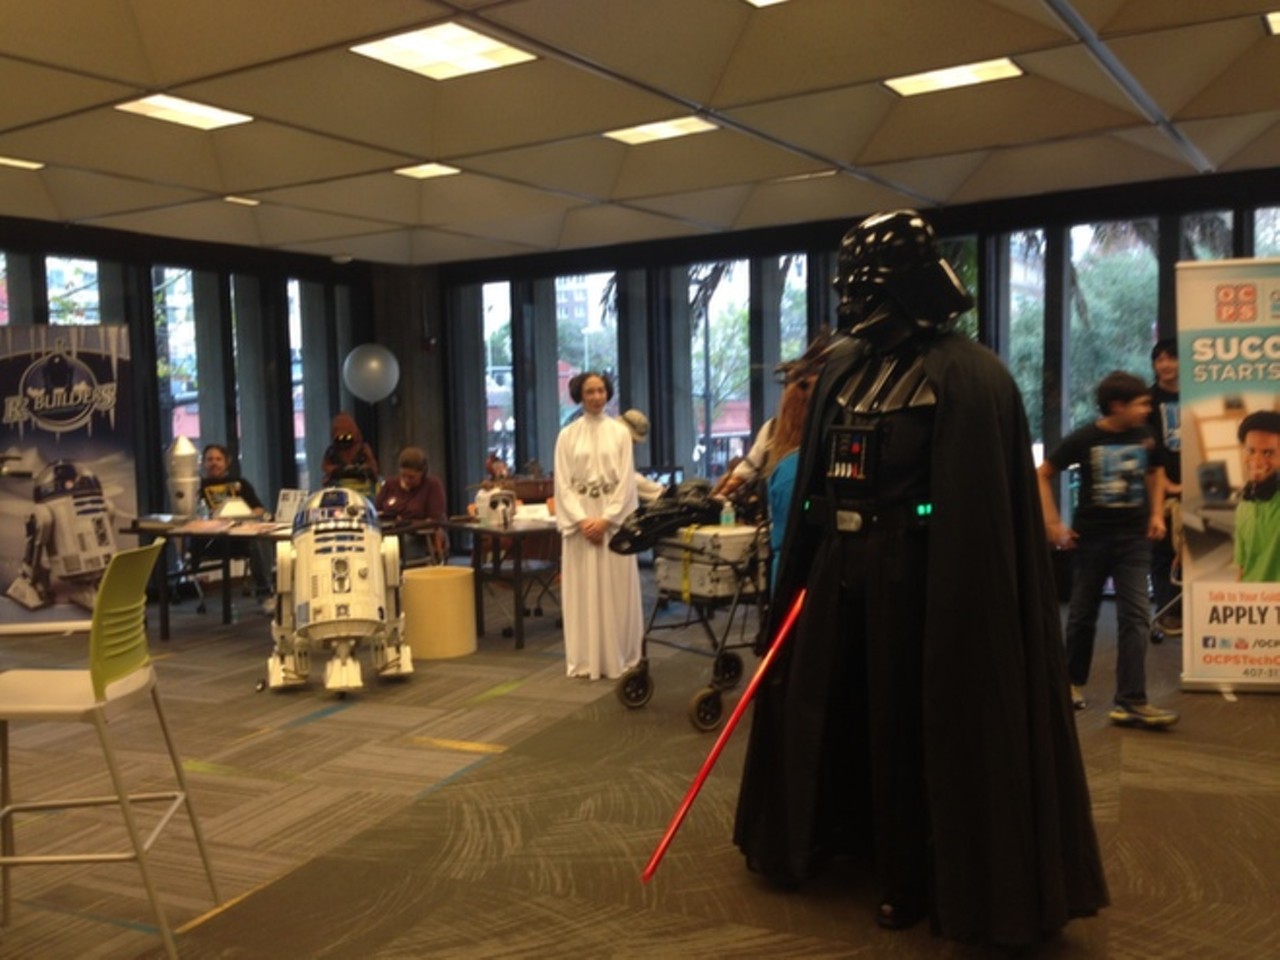 And naturally, Darth Vader was there, too.